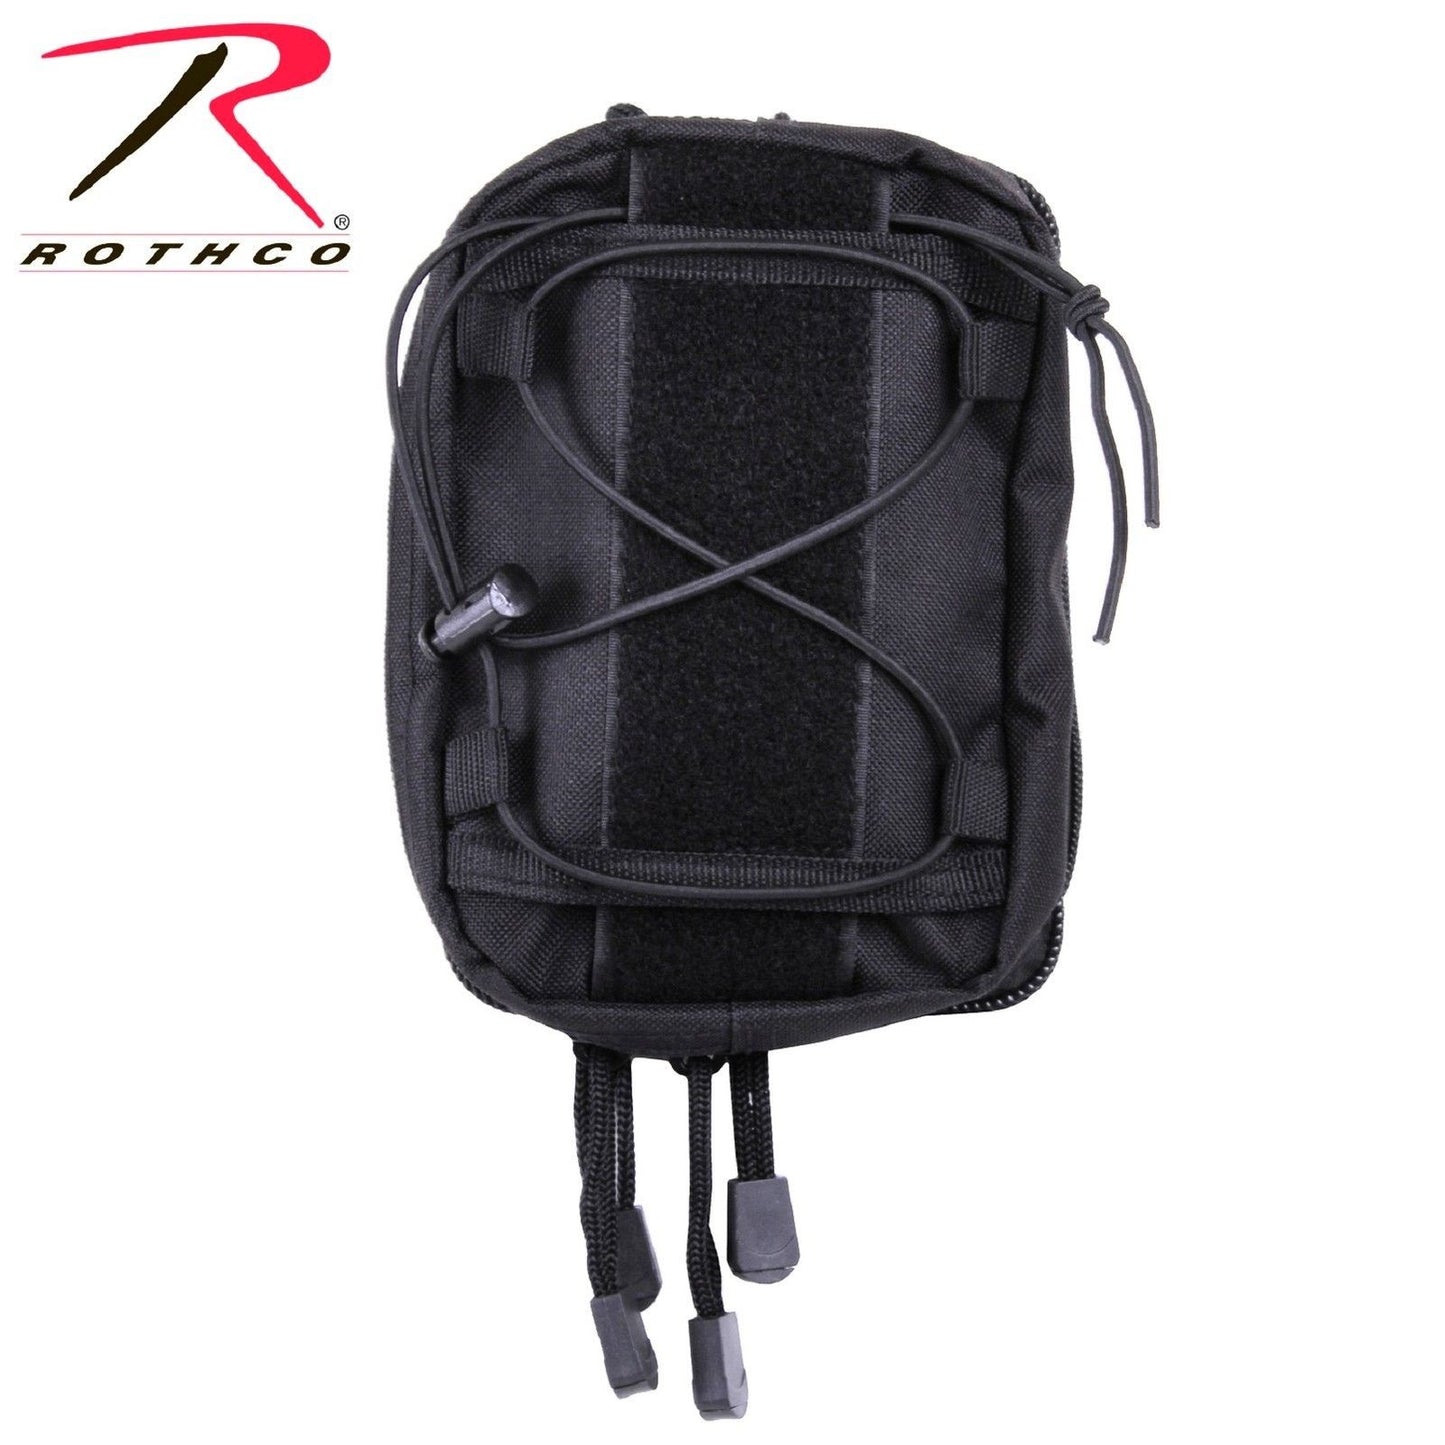 Rothco Black Tactical Foldable Backpack - 18" Customizable MOLLE Bag Pack 27710